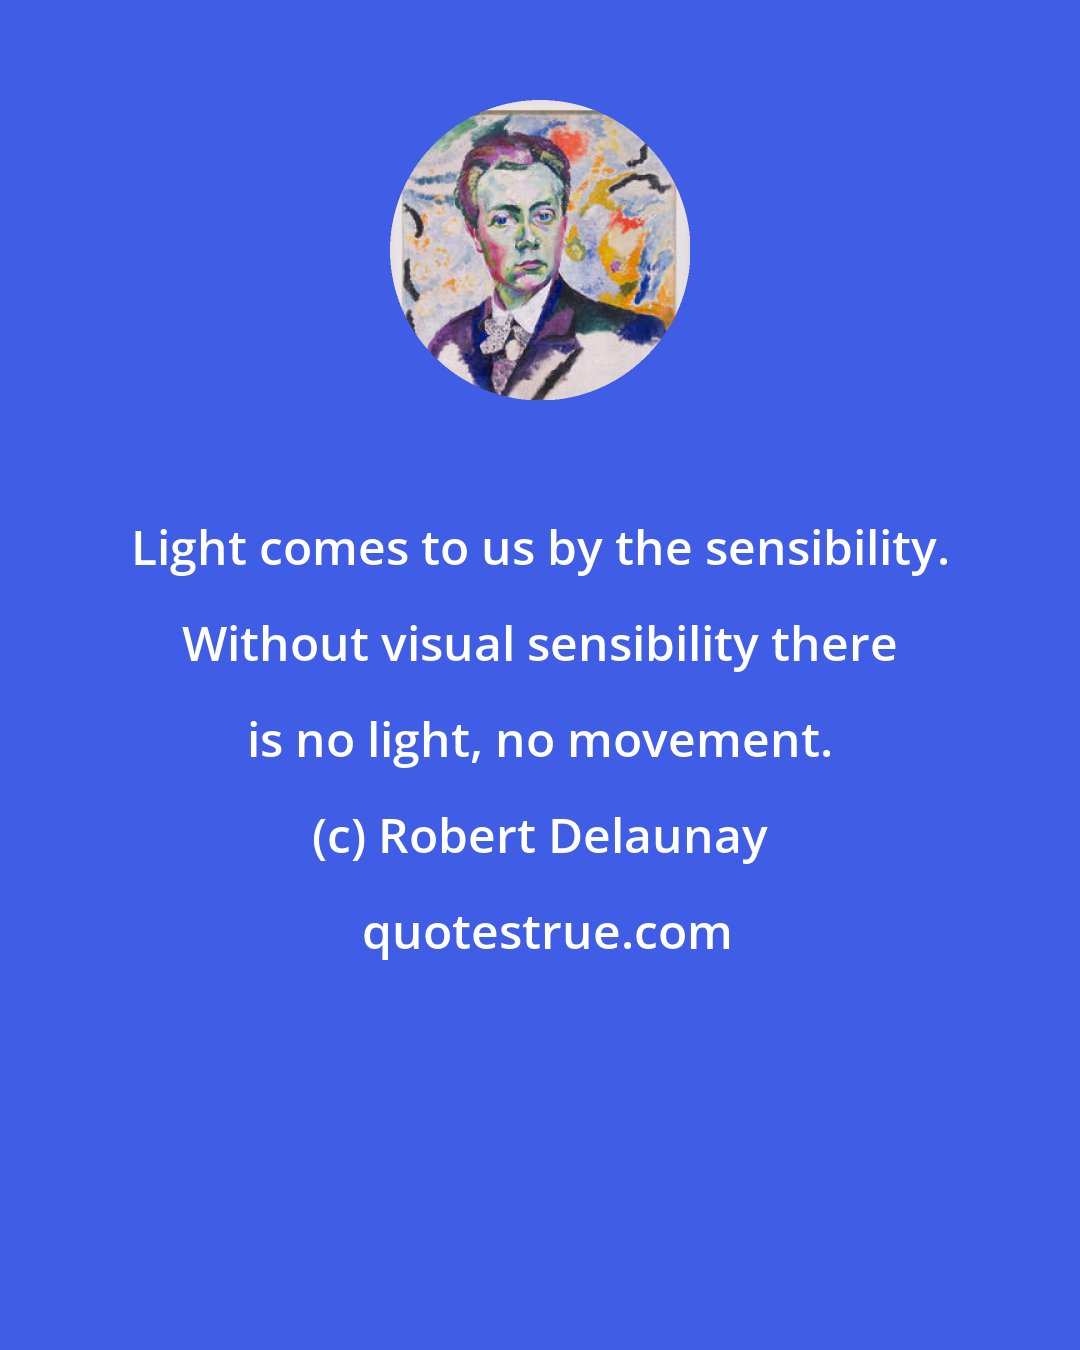 Robert Delaunay: Light comes to us by the sensibility. Without visual sensibility there is no light, no movement.